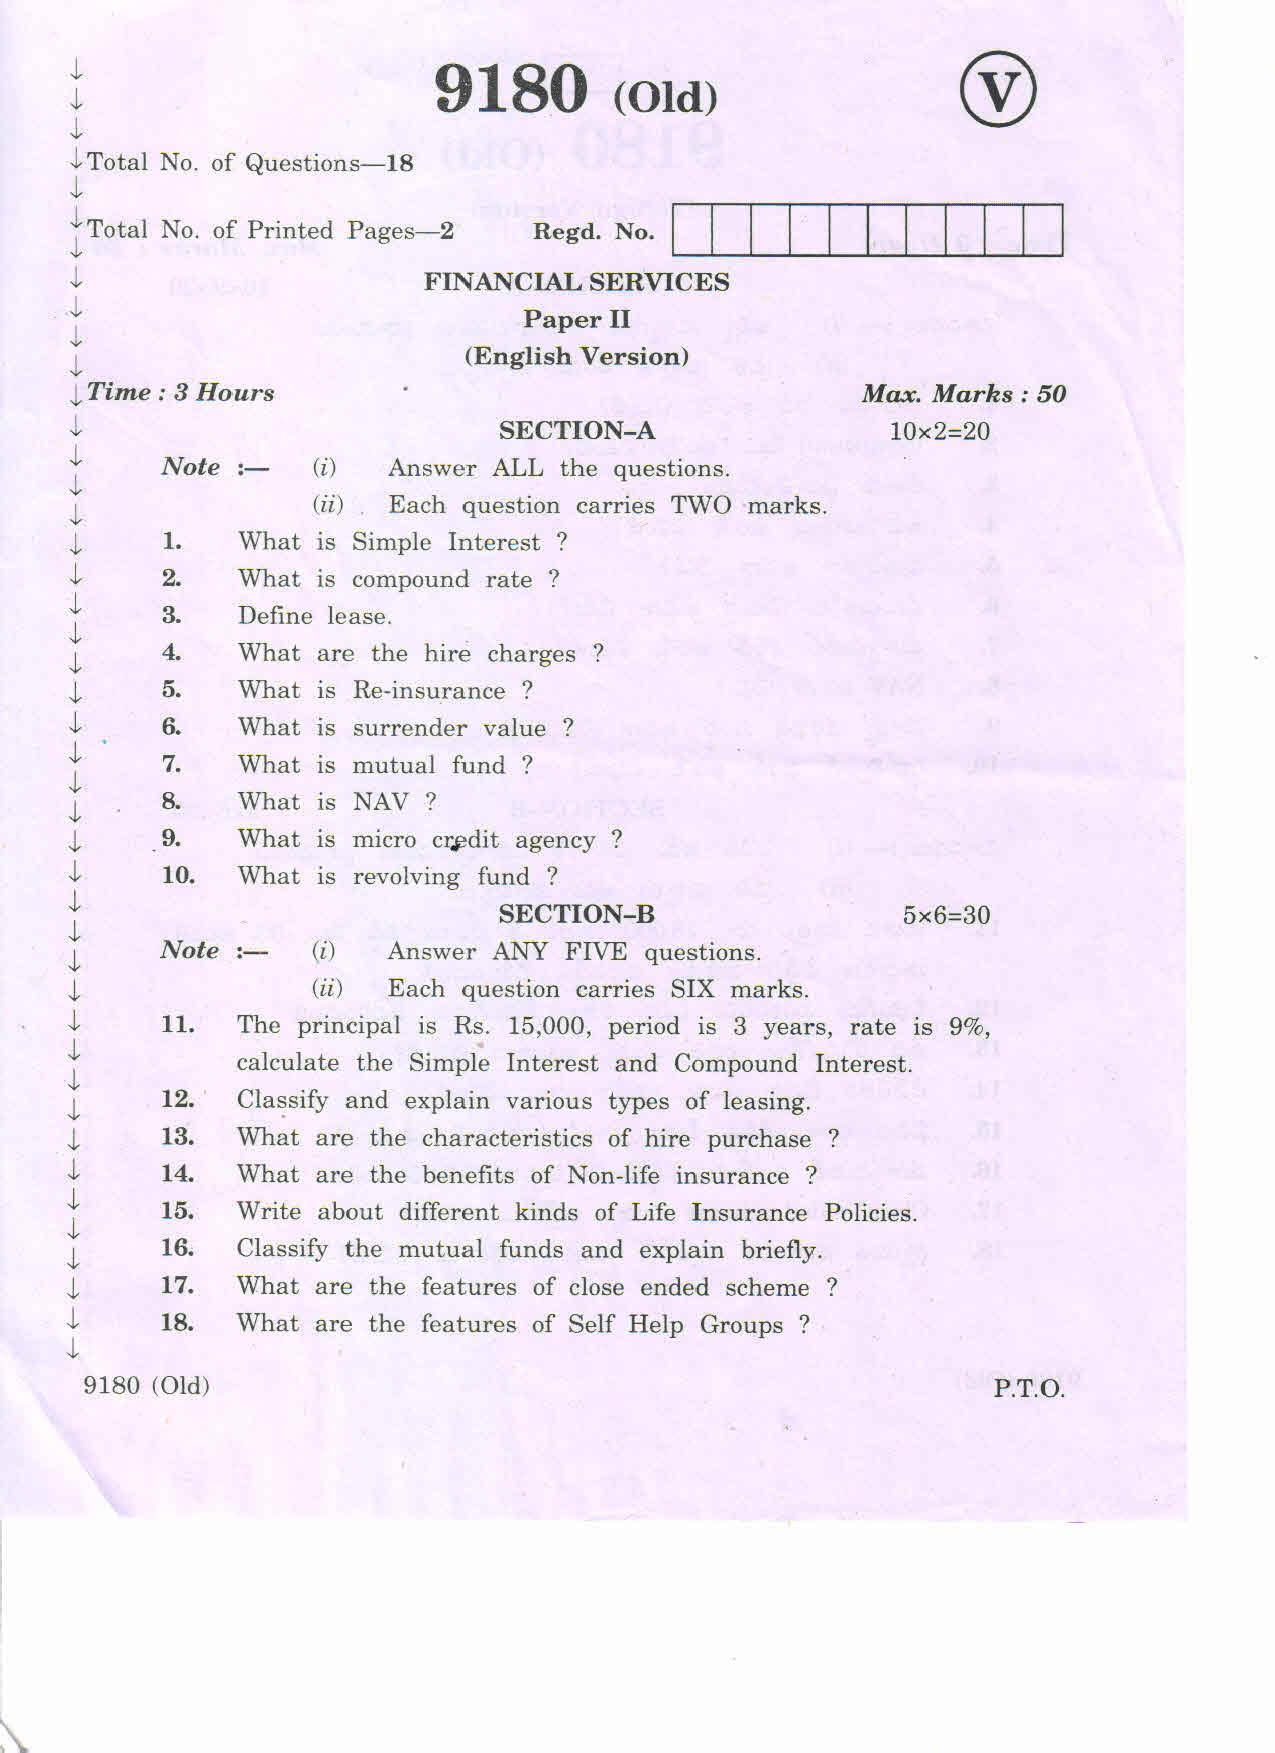 AP Inter 2nd Year Vocational Question Paper March - 2020 - Financial Services - II (old) - Page 1